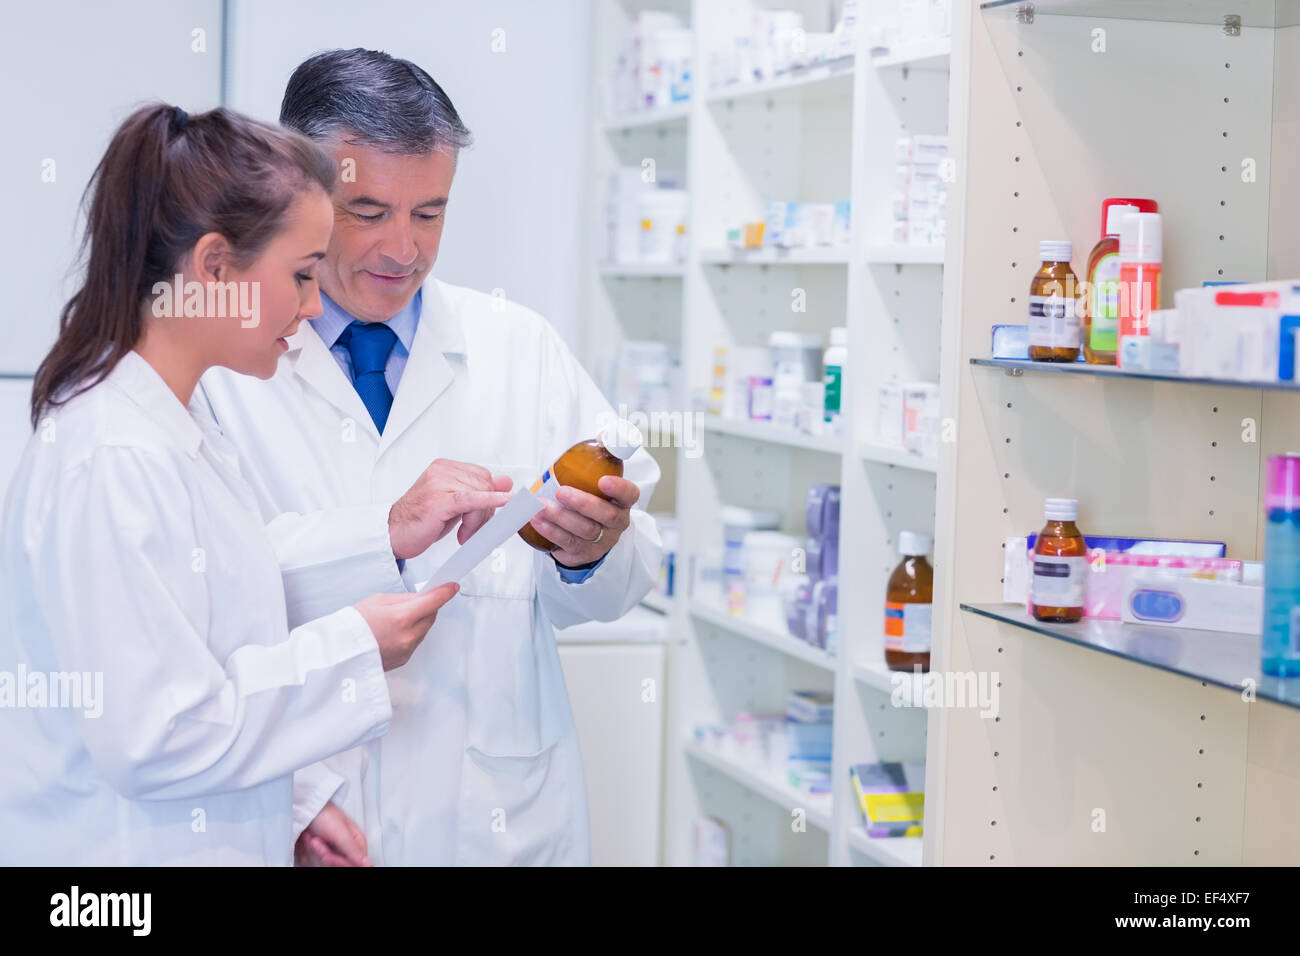 Pharmacist and trainee talking together about medication Stock Photo